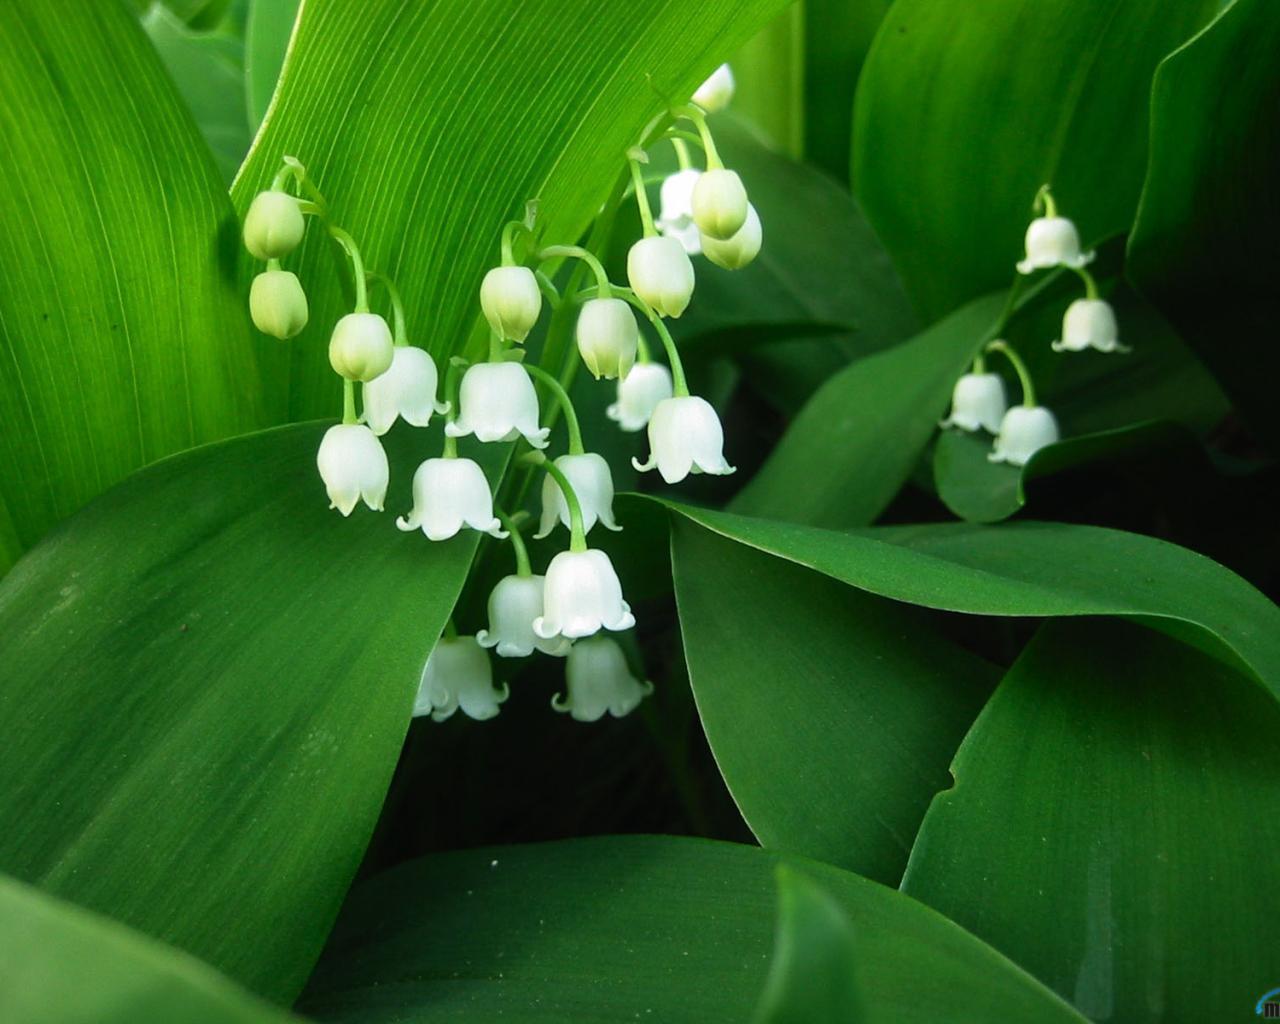 lily of the valley, plants, flowers, green QHD